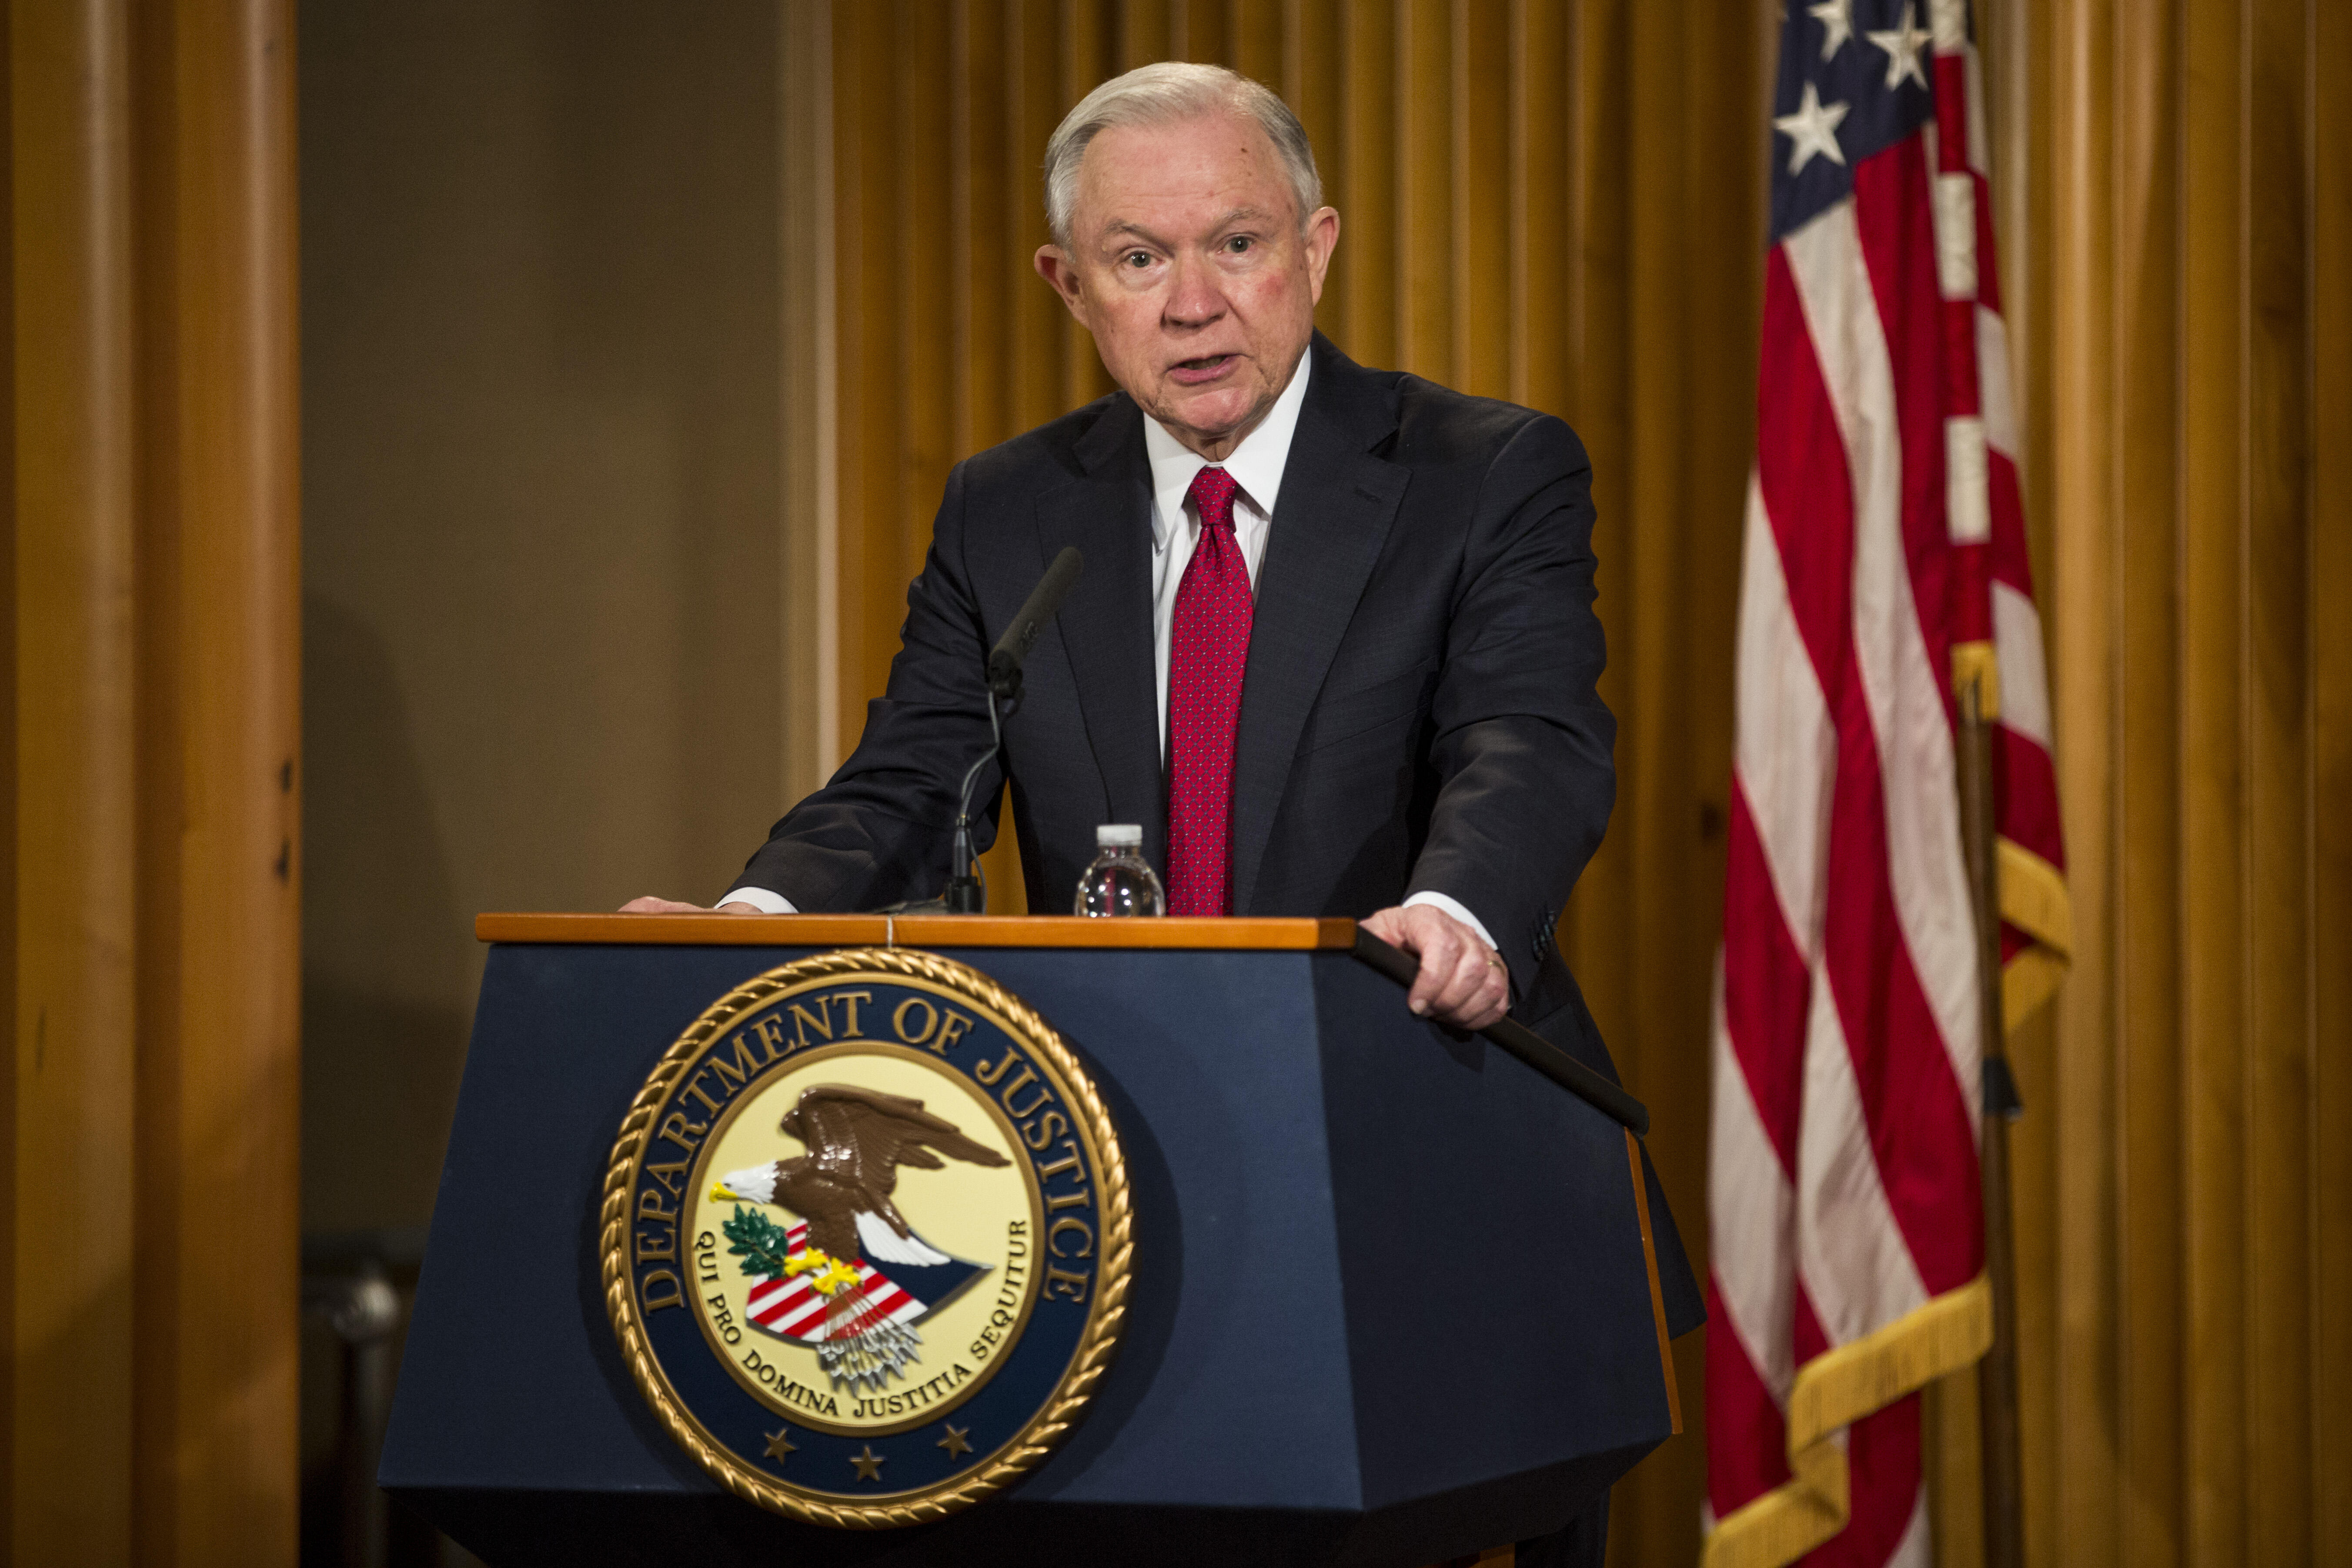 WASHINGTON, D.C. - FEBRUARY 28: U.S. Attorney General Jeff Sessions delivers remarks at the Justice Department's 2017 African American History Month Observation at the Department of Justice on February 28, 2017 in Washington, D.C. The event also included 